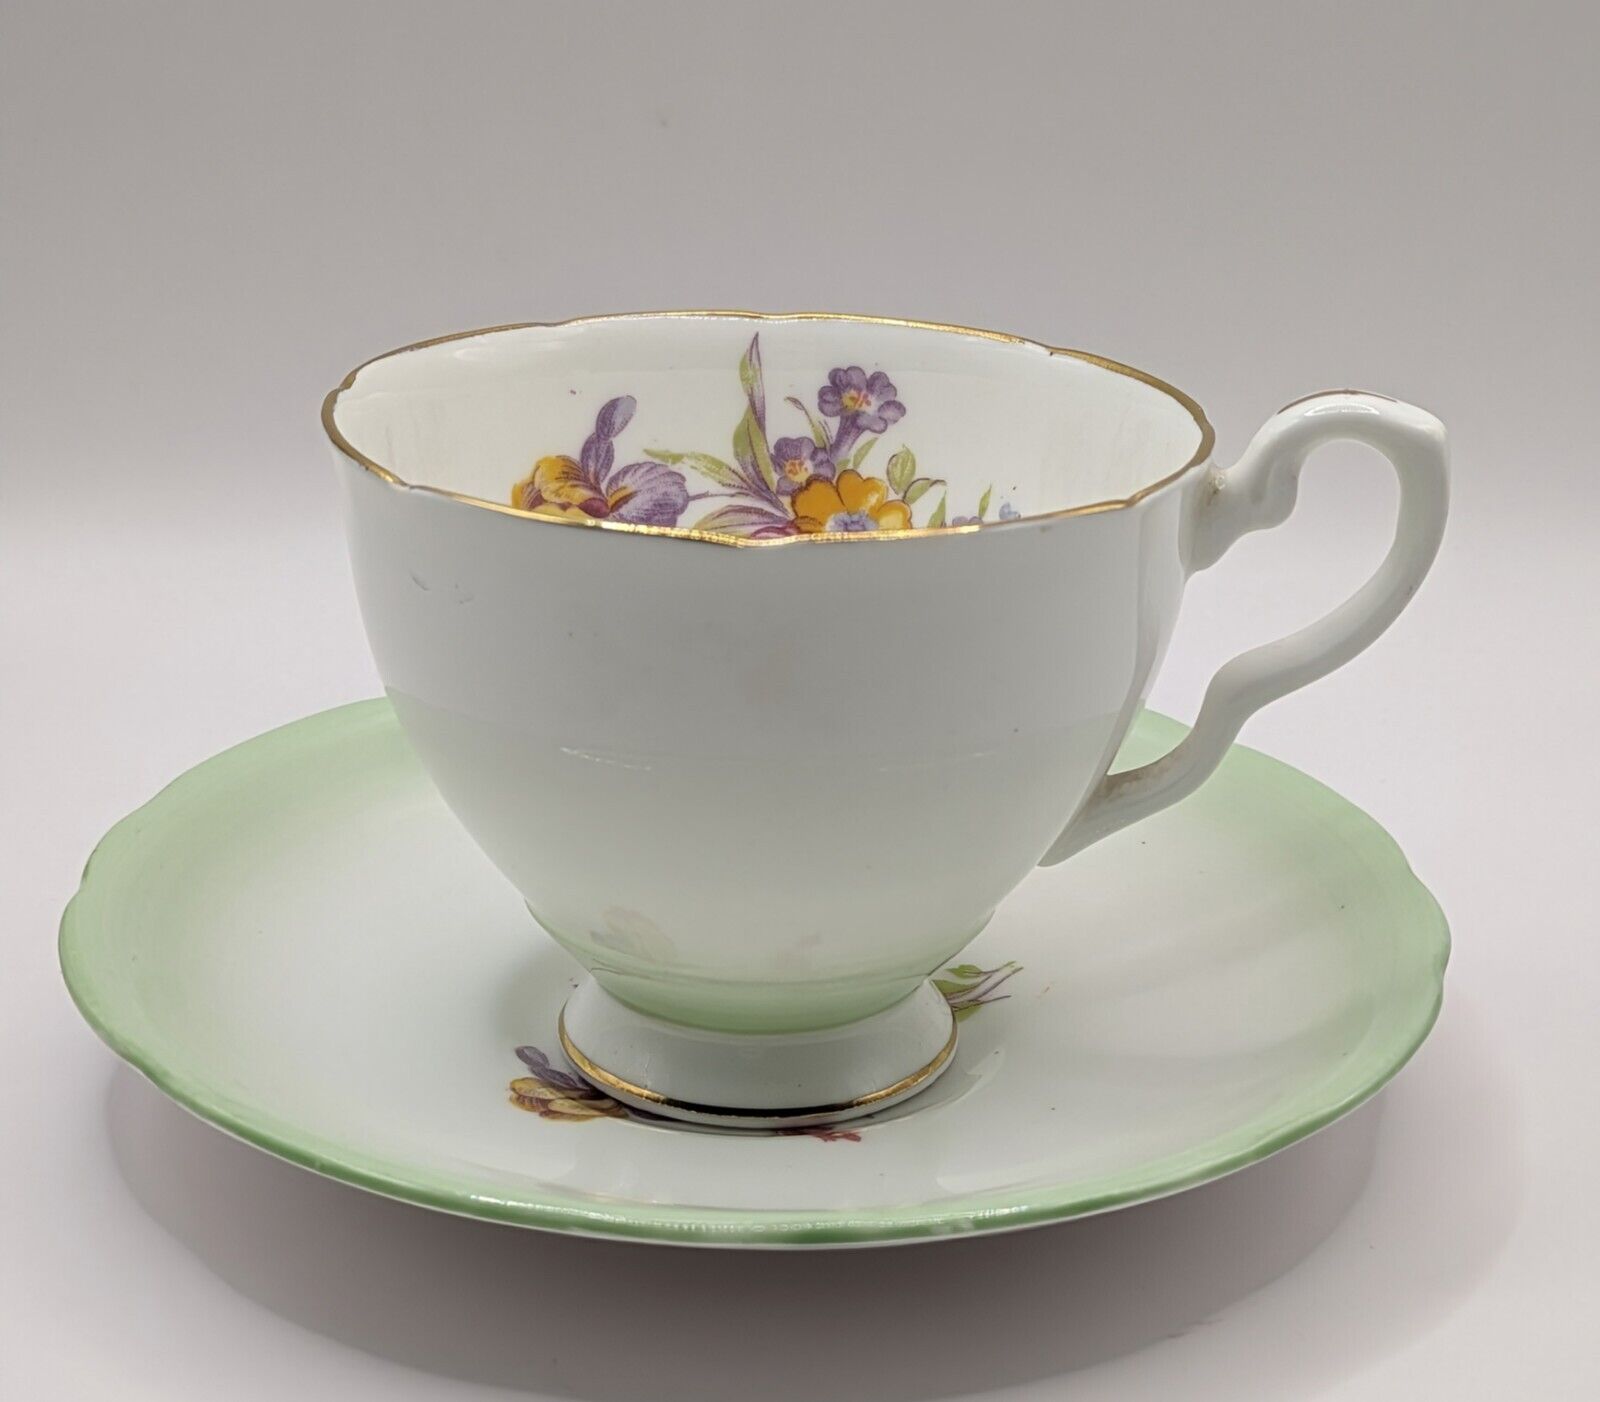 Royal Stafford England Tea Cup And Saucer Mint Green White Floral Design